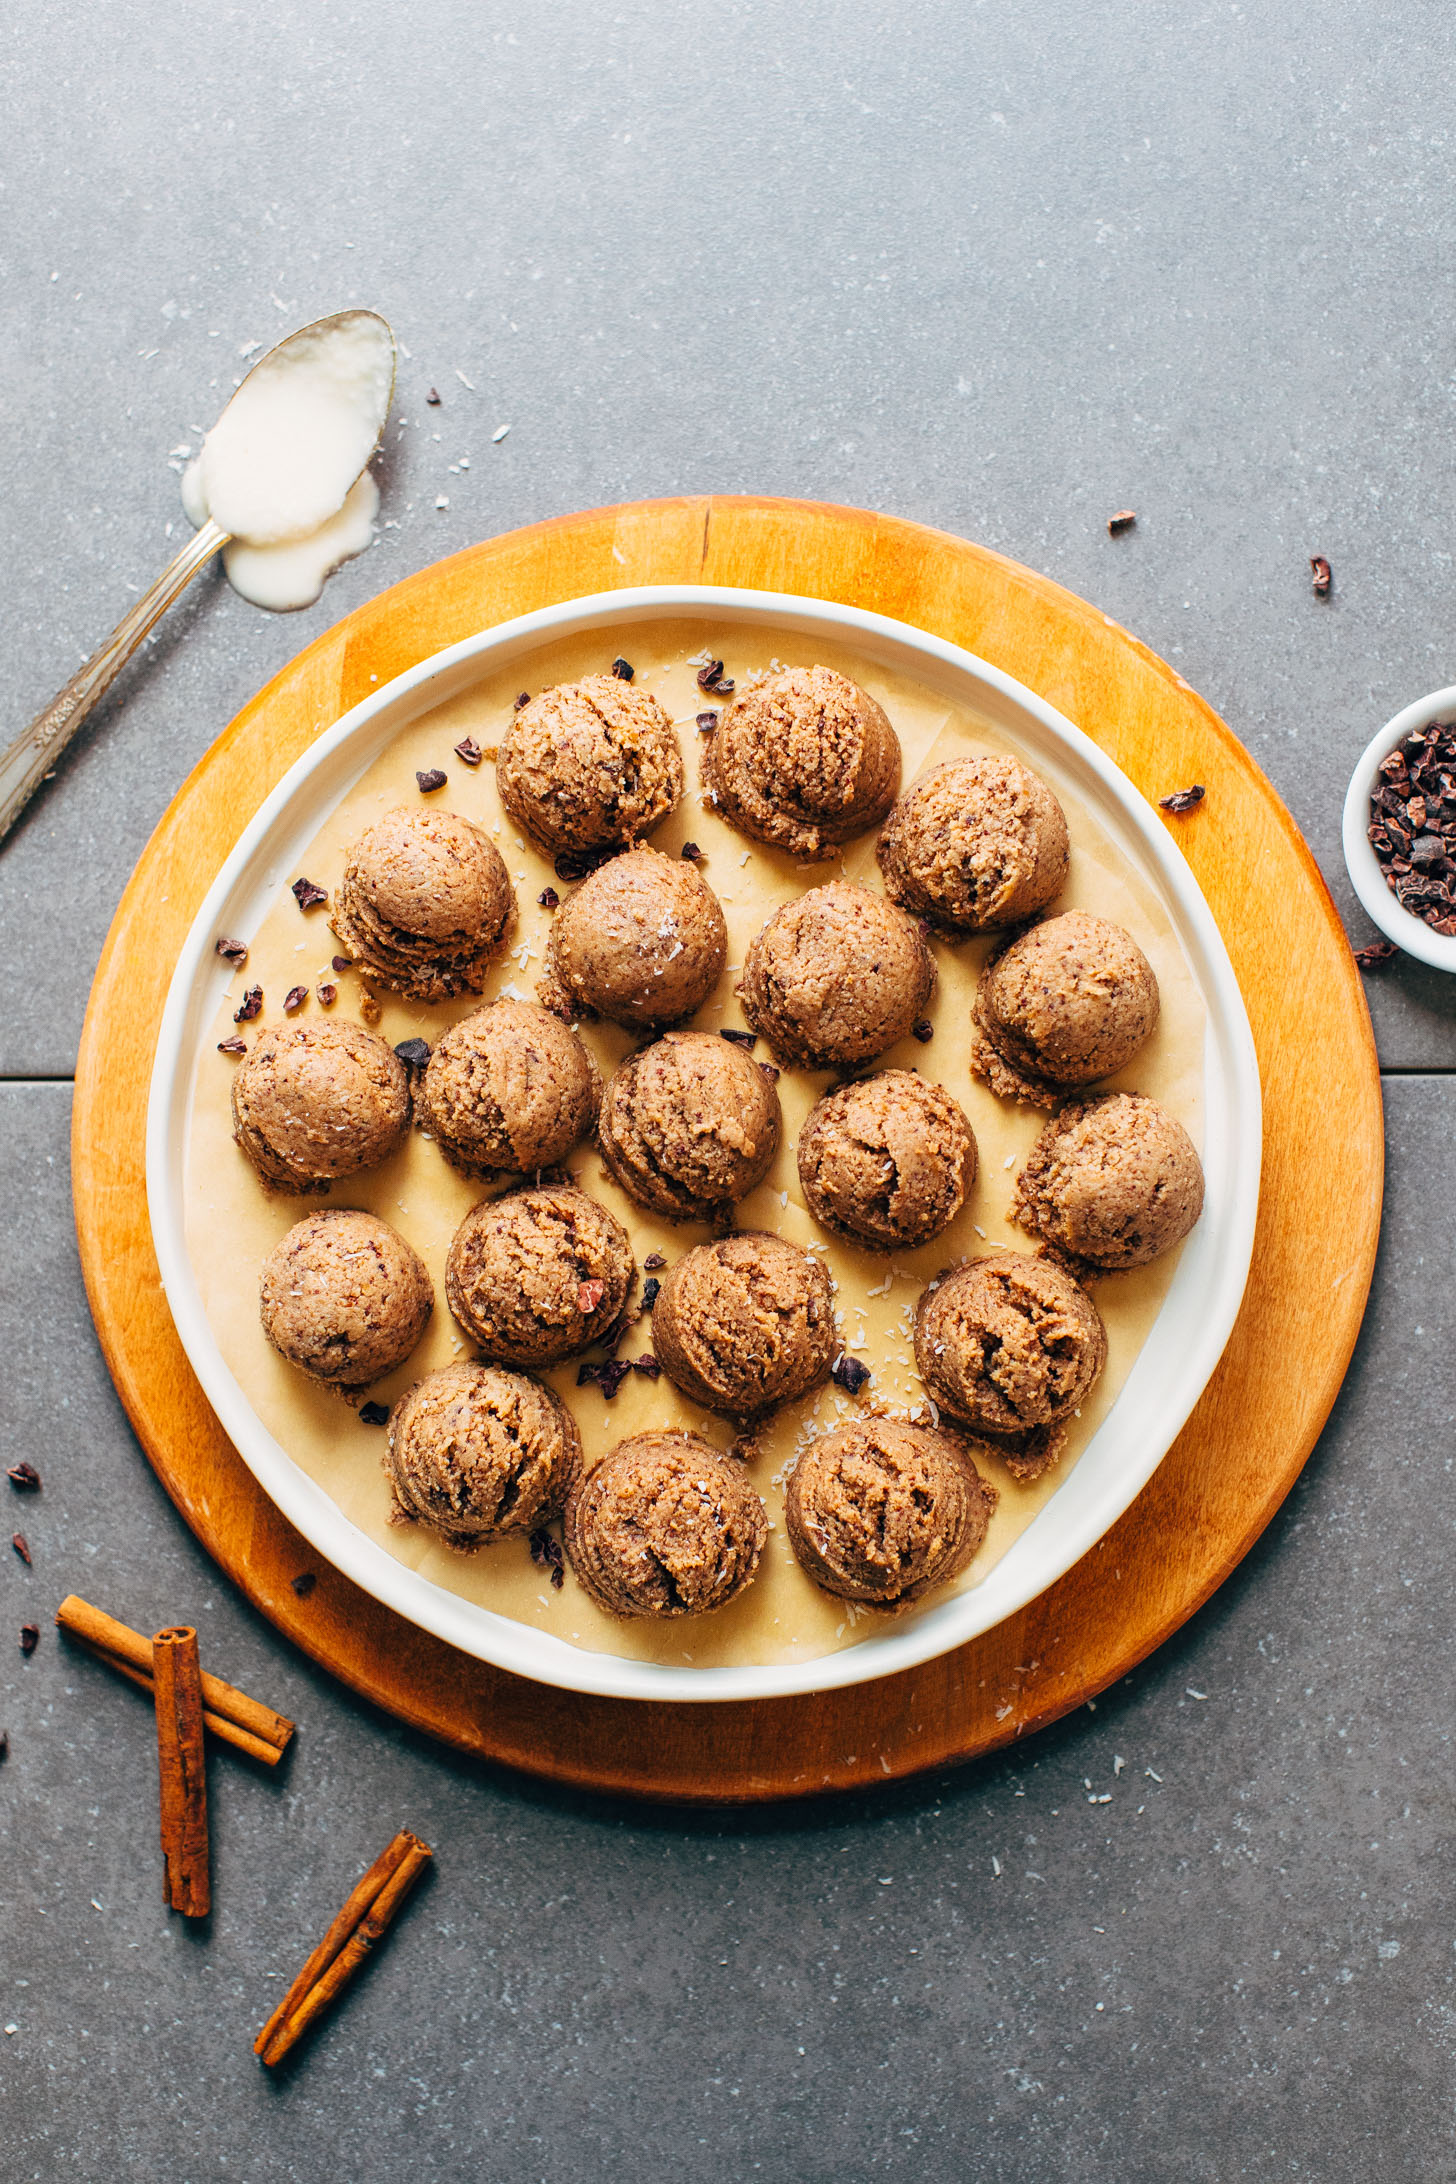 Plate full of Chocolate Coconut Tahini Power Bites ready to be devoured for a delicious plant-based snack